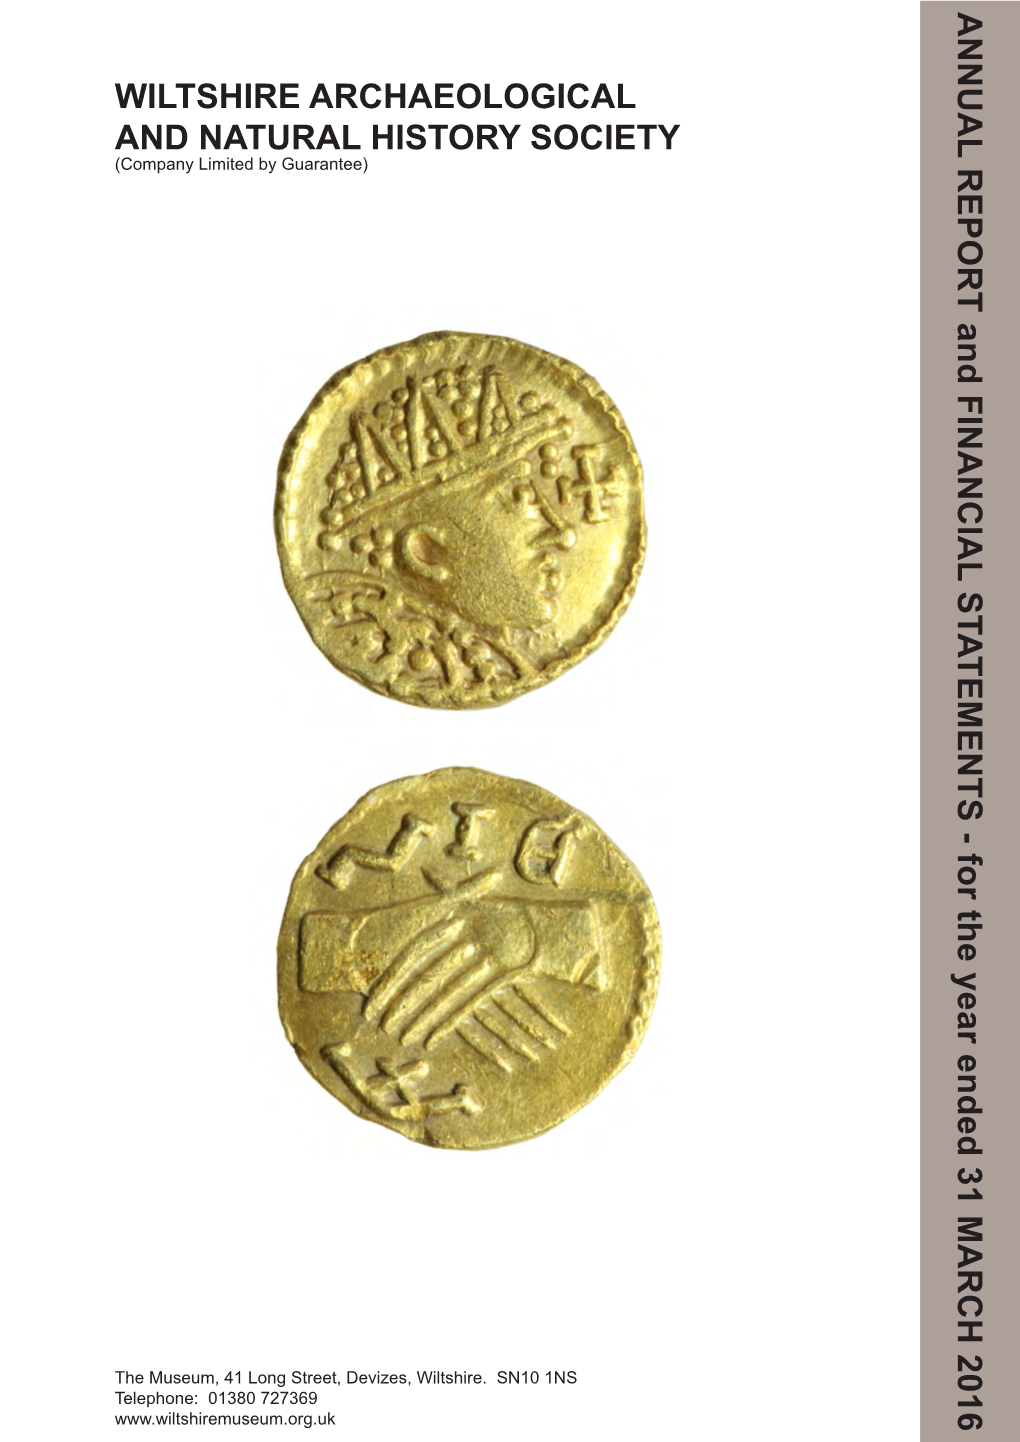 WILTSHIRE ARCHAEOLOGICAL and NATURAL HISTORY SOCIETY ANNUAL REPORT and FINANCIAL STA TEMENTS